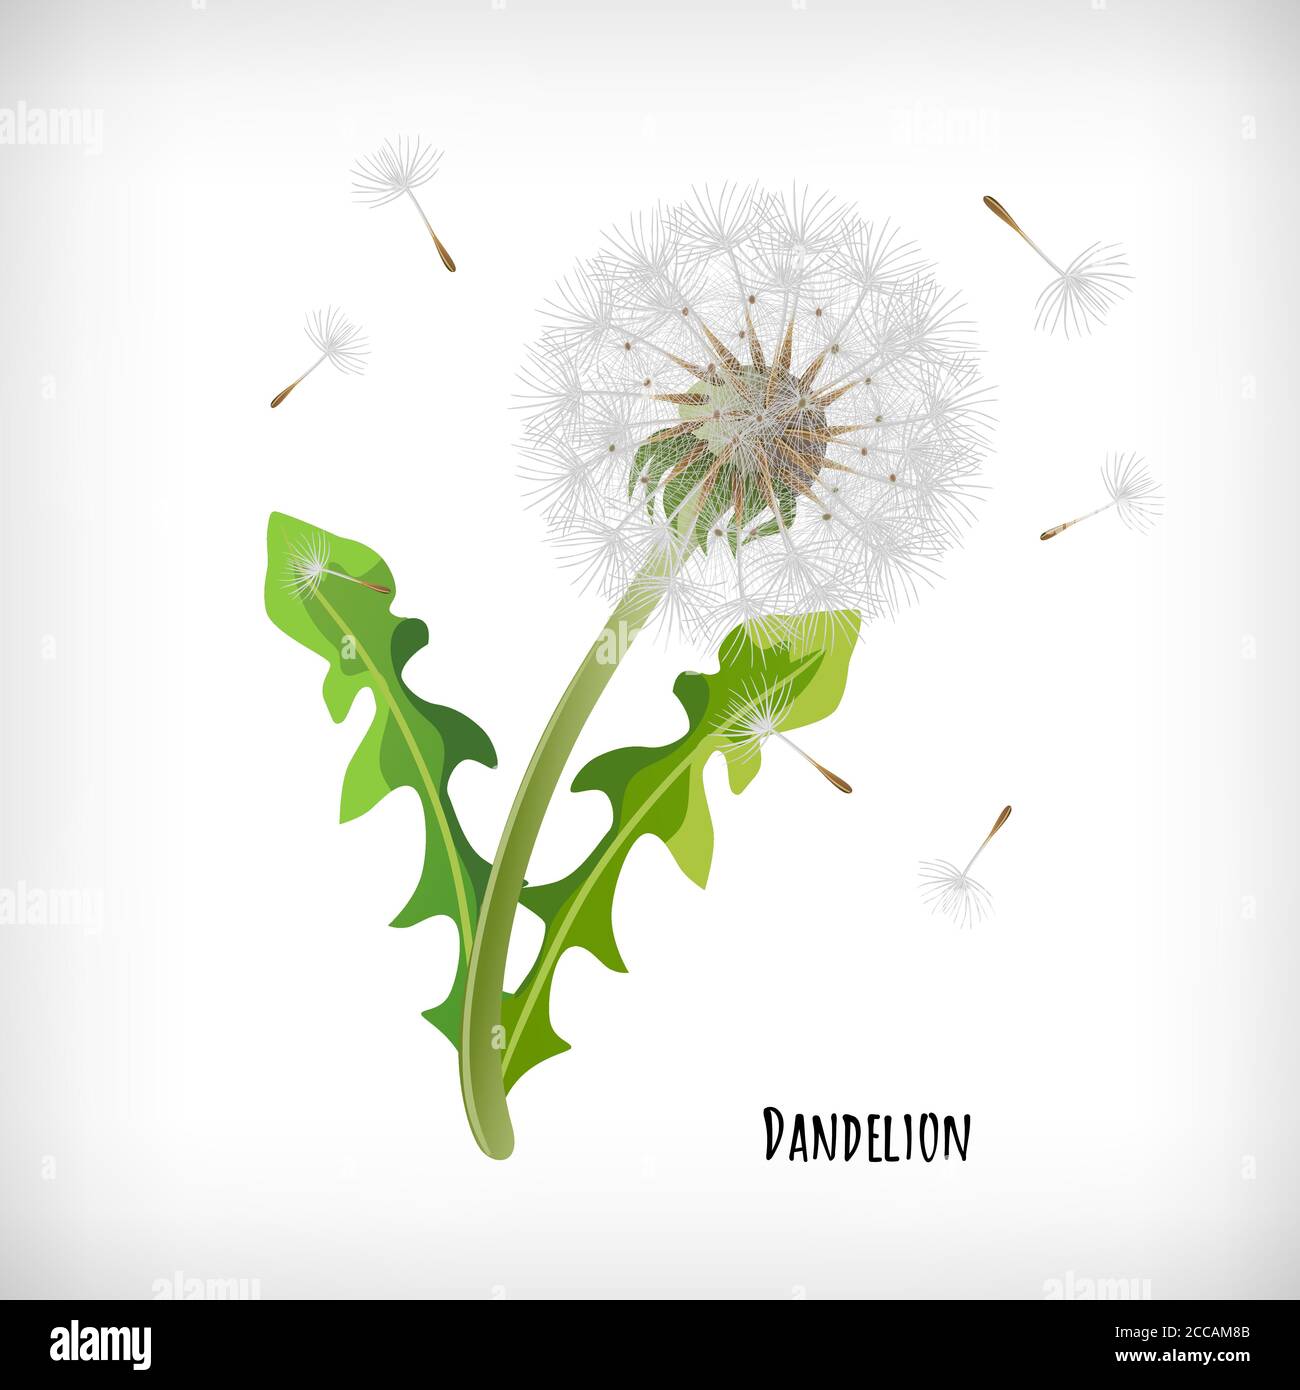 Dandelion plant with green leaves and flying seeds in the wind isolated on vignette background. Lettering Dandelion. Hand drawn herb icon. Element for Stock Vector